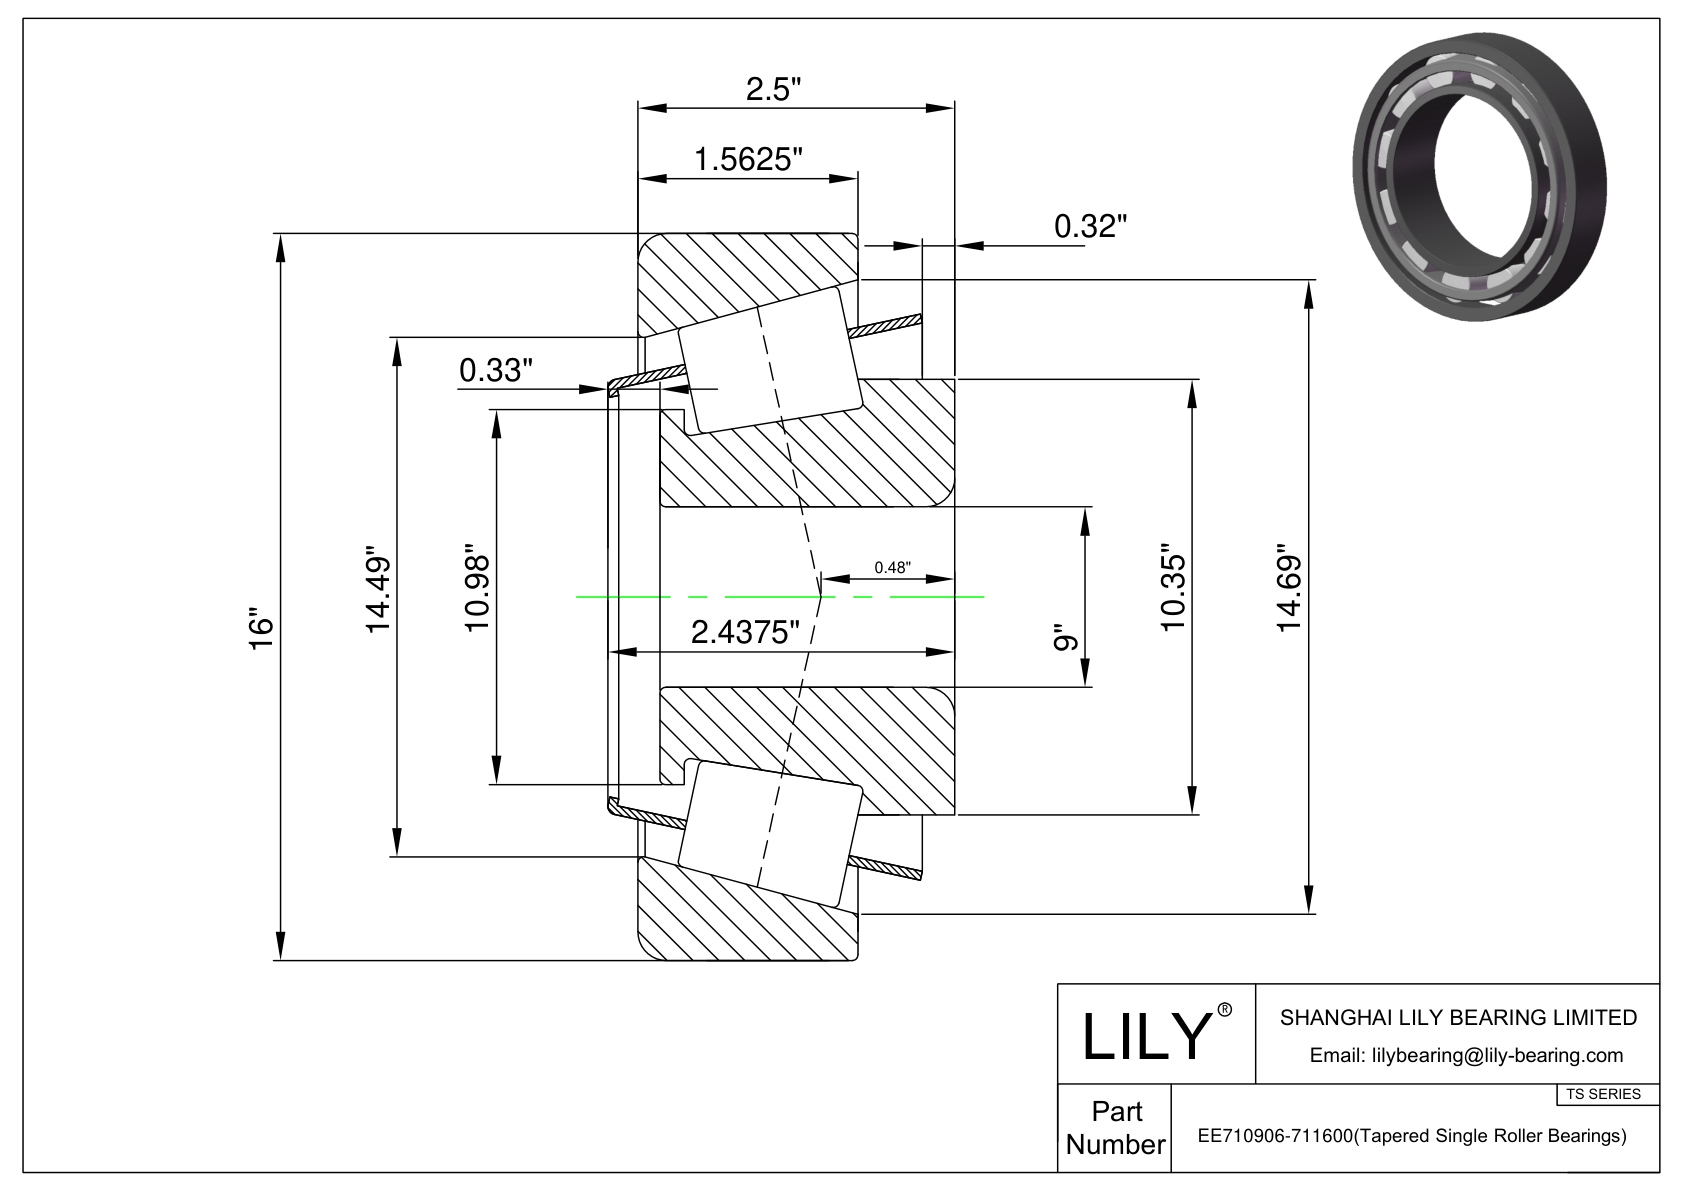 EE710906-711600 TS (Tapered Single Roller Bearings) (Imperial) cad drawing